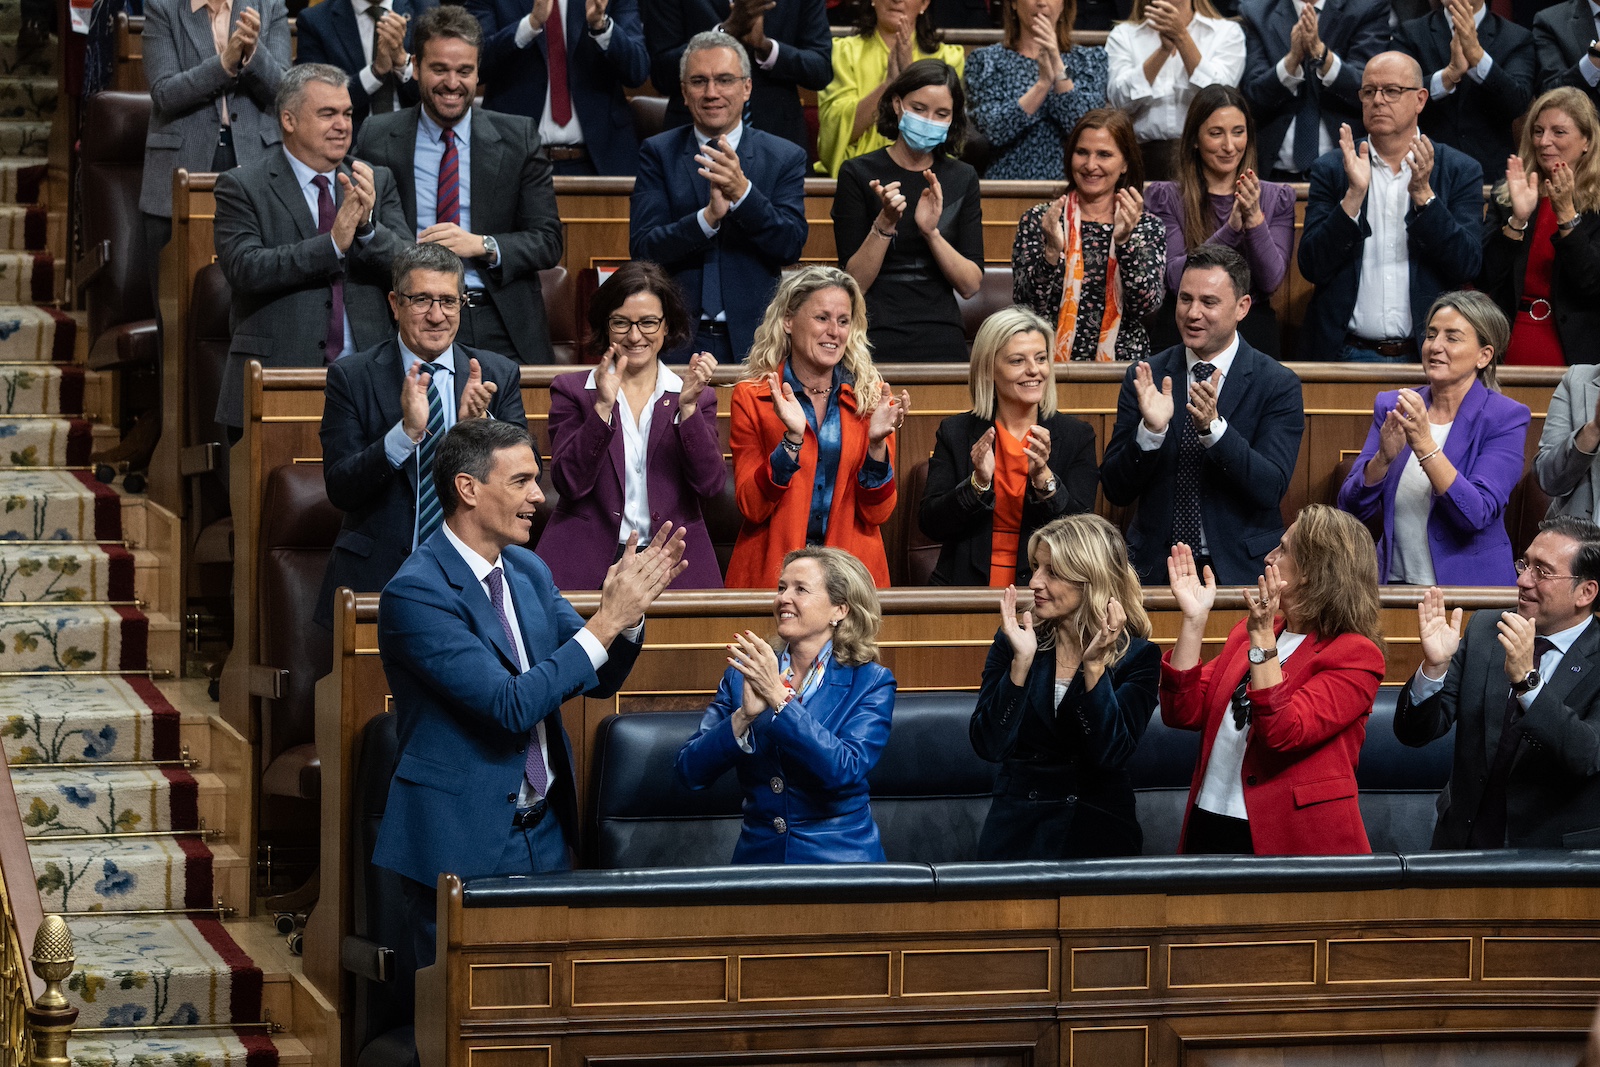 Spain’s Re-Elected Prime Minister Has Named A Government With More Women Than Men